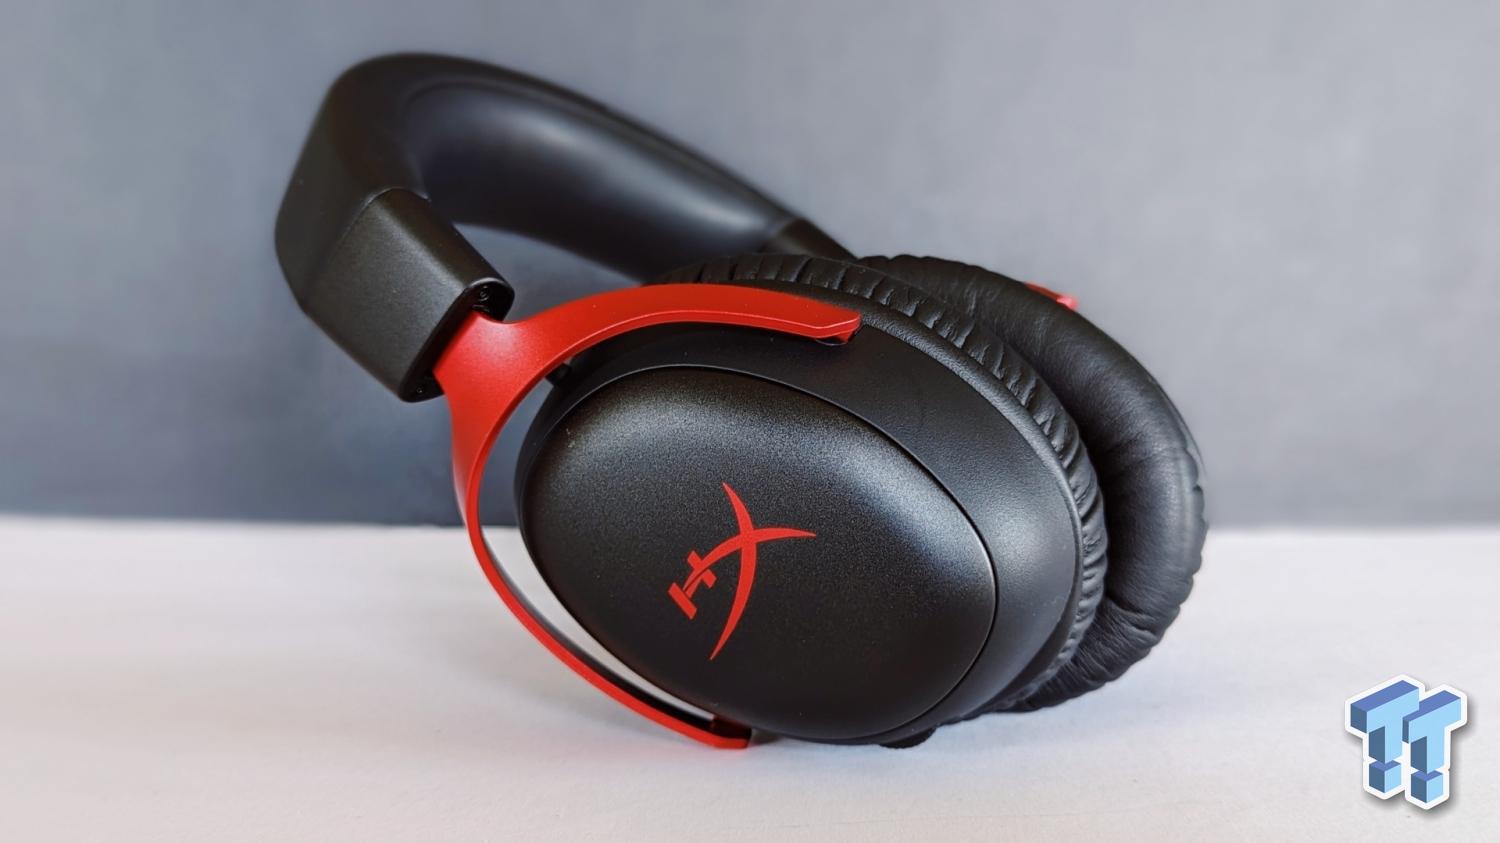 HyperX Cloud III review: Comfort and clarity highlight this headset